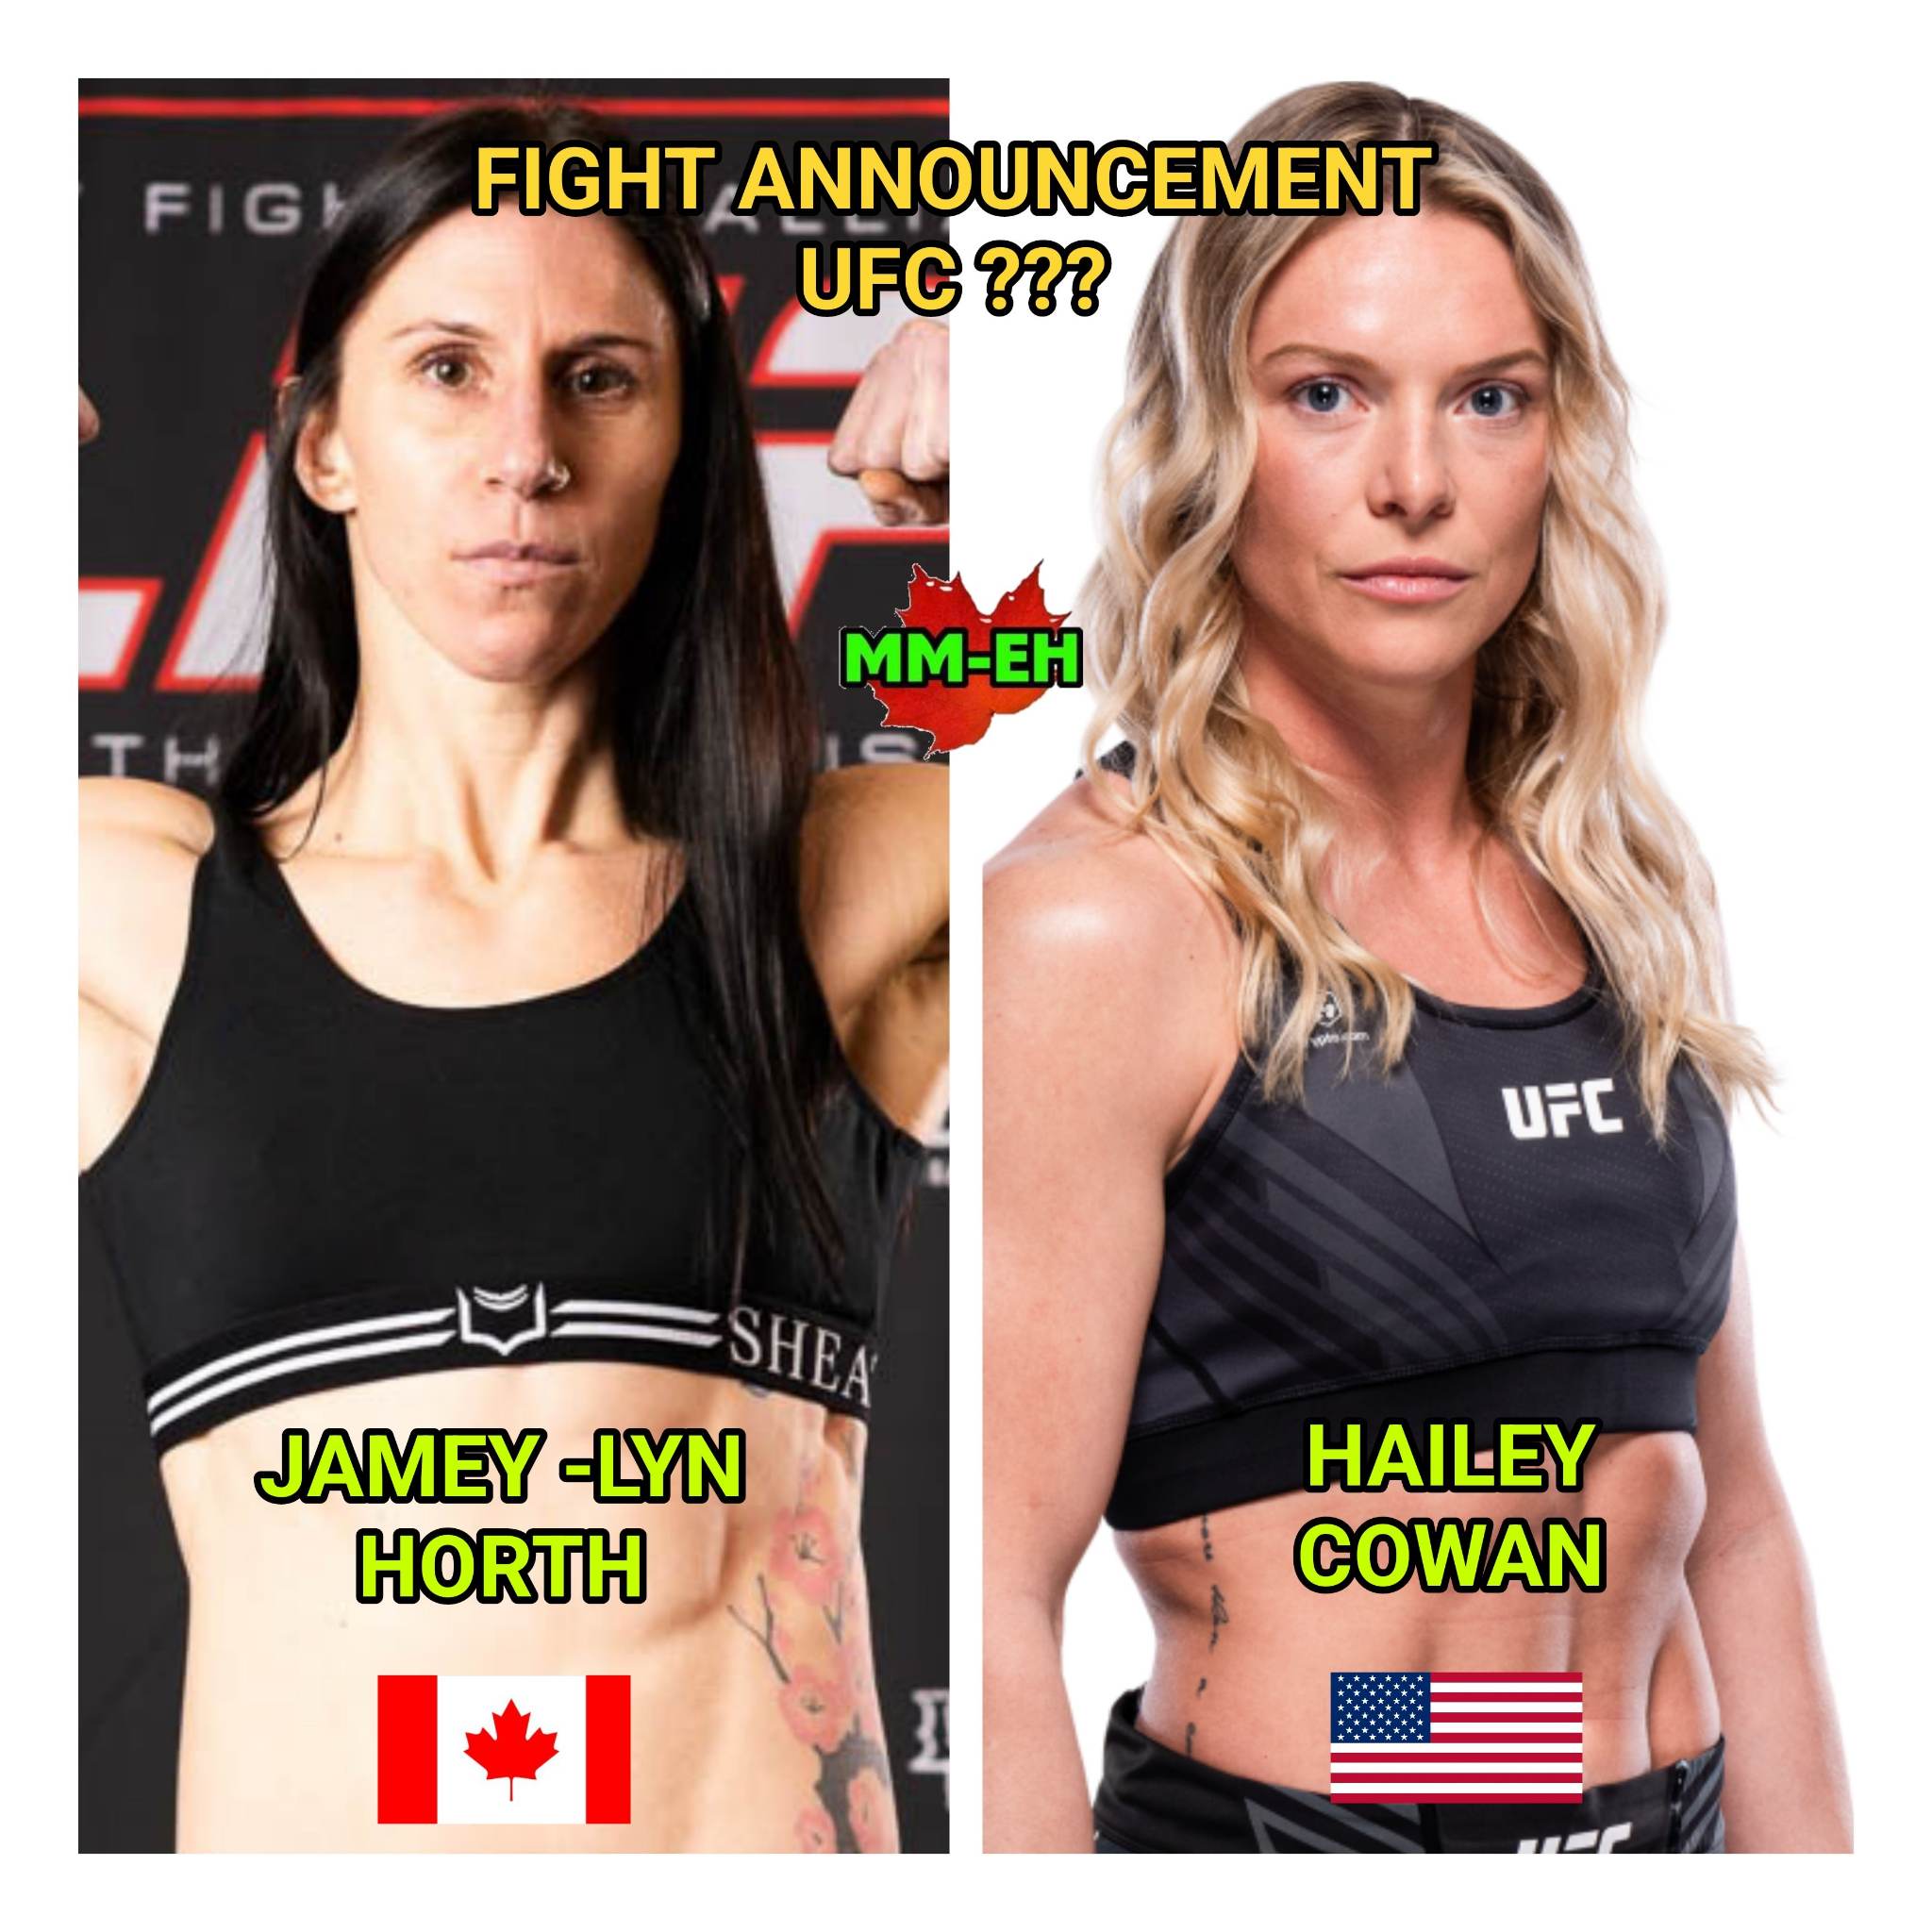 Jamey-Lyn Horth UFC Debut MM-eh